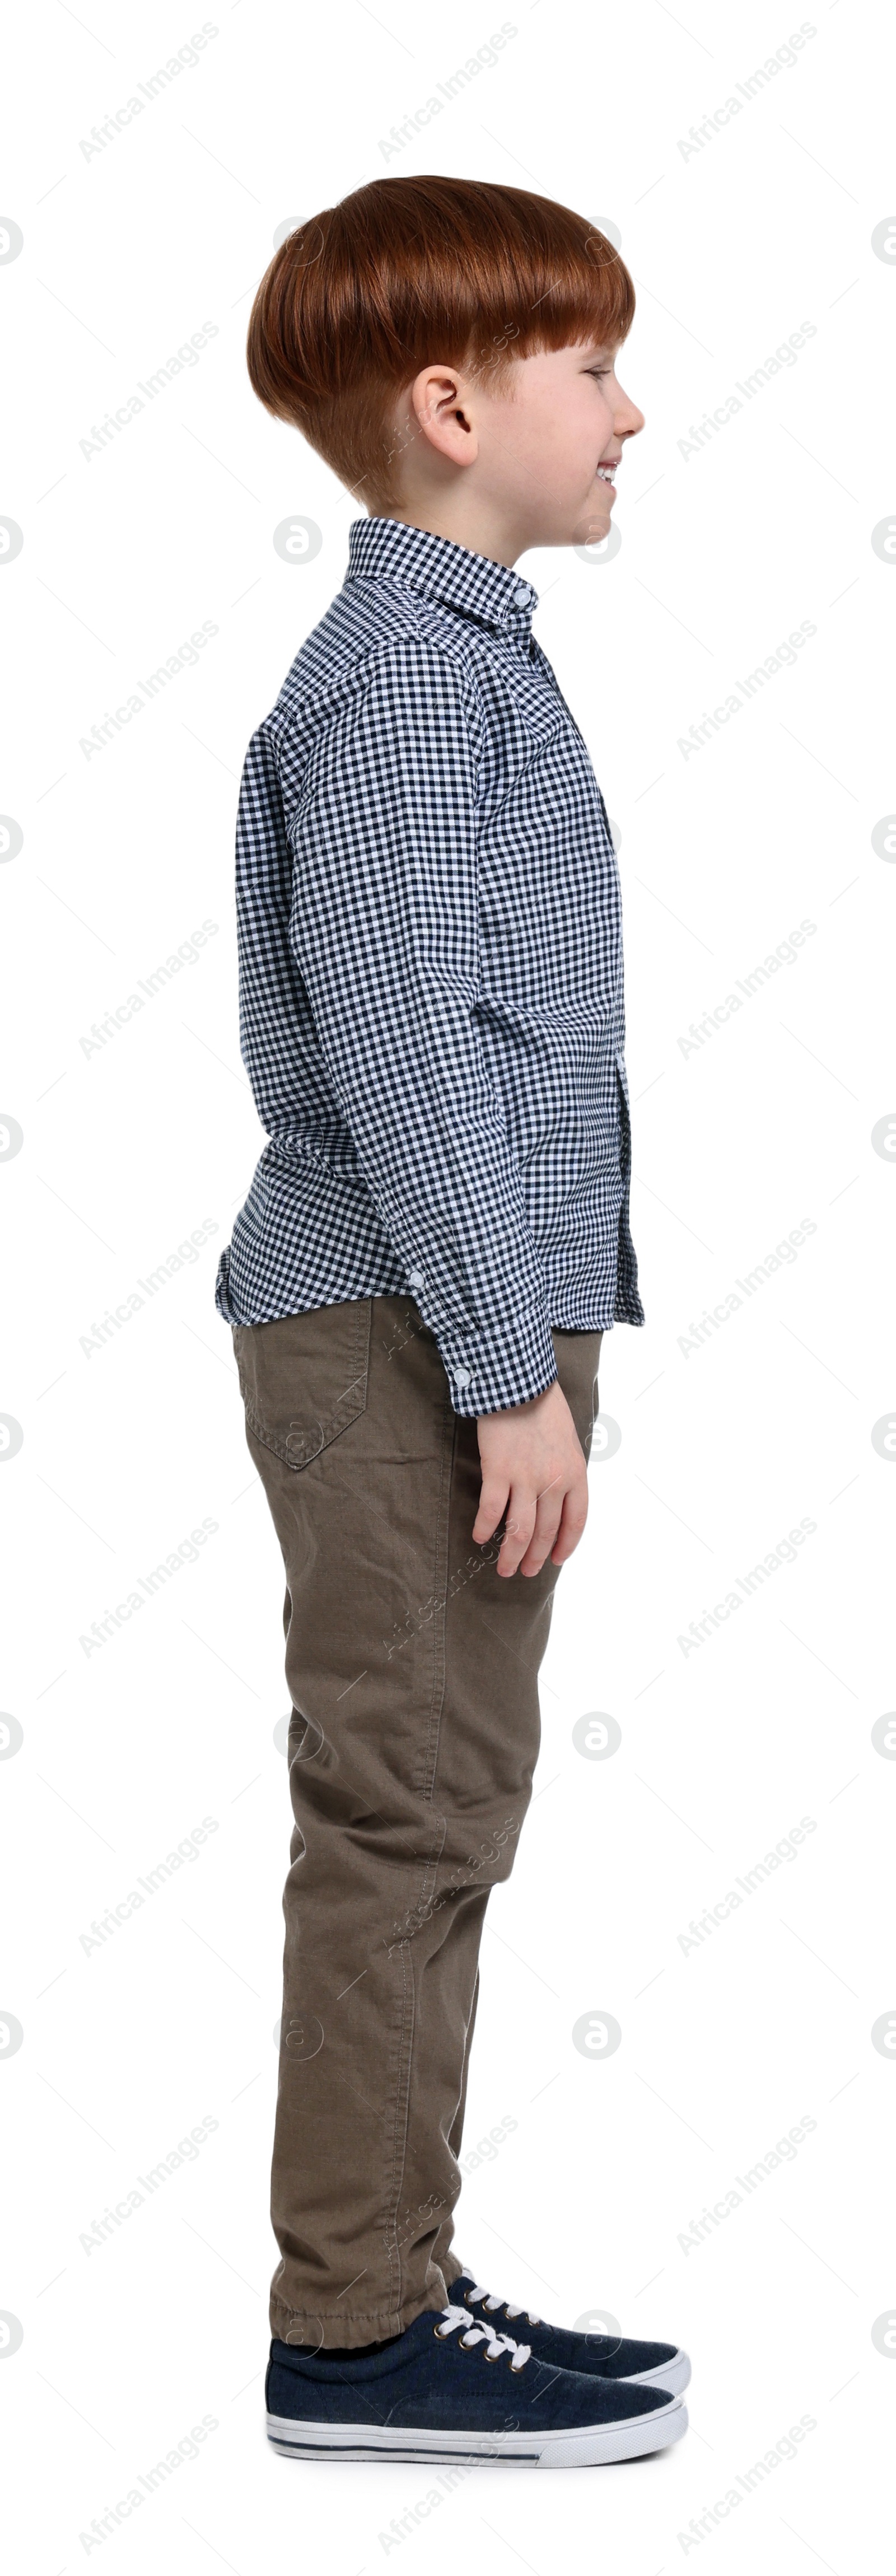 Photo of Little boy in shirt and pants on white background